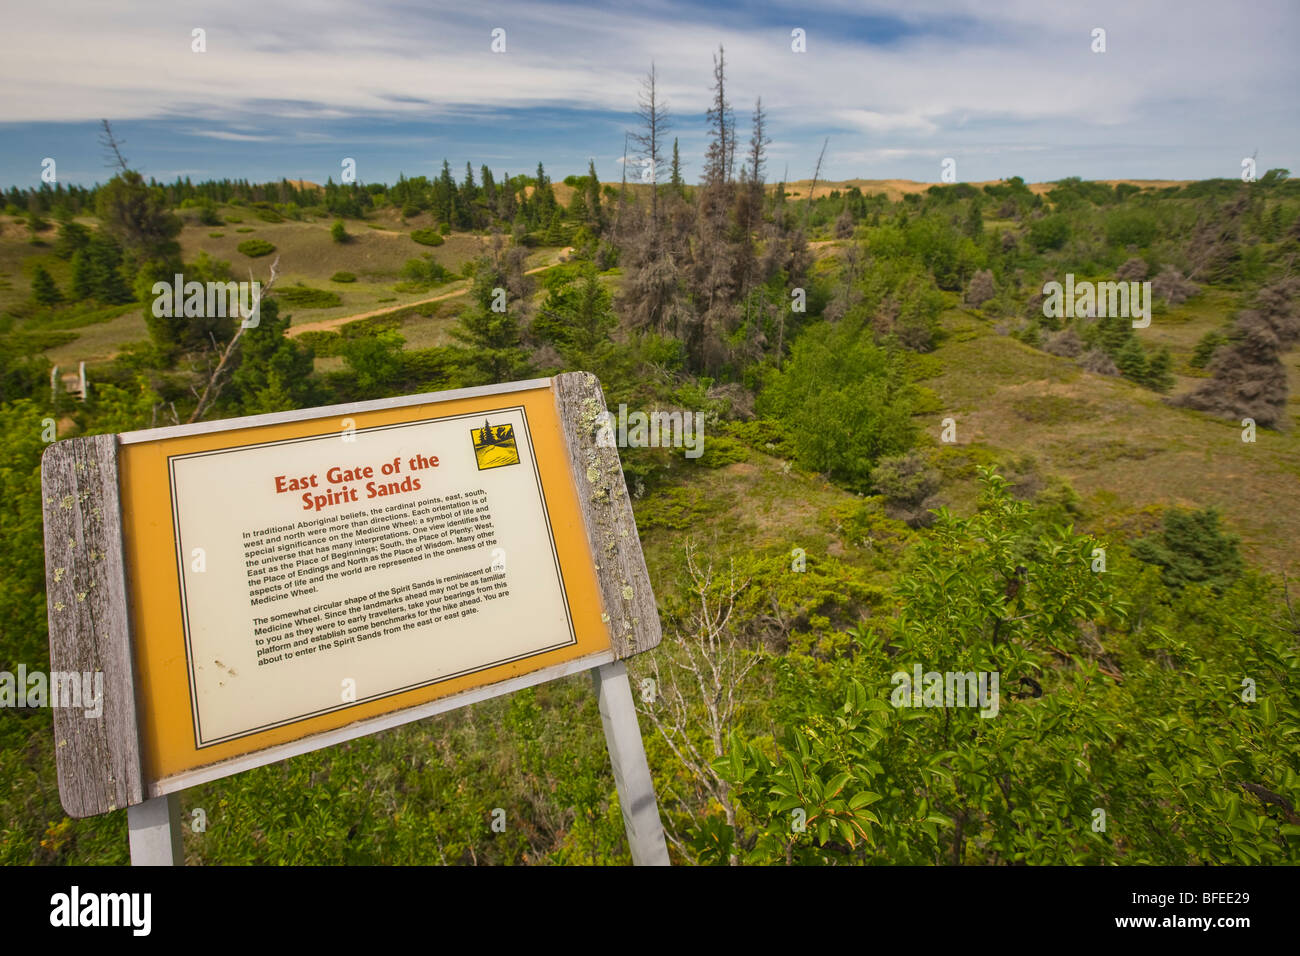 Informational sign at the East Gate of the Spirit Sands trail, Spruce Woods Provincial Park, Manitoba, Canada Stock Photo